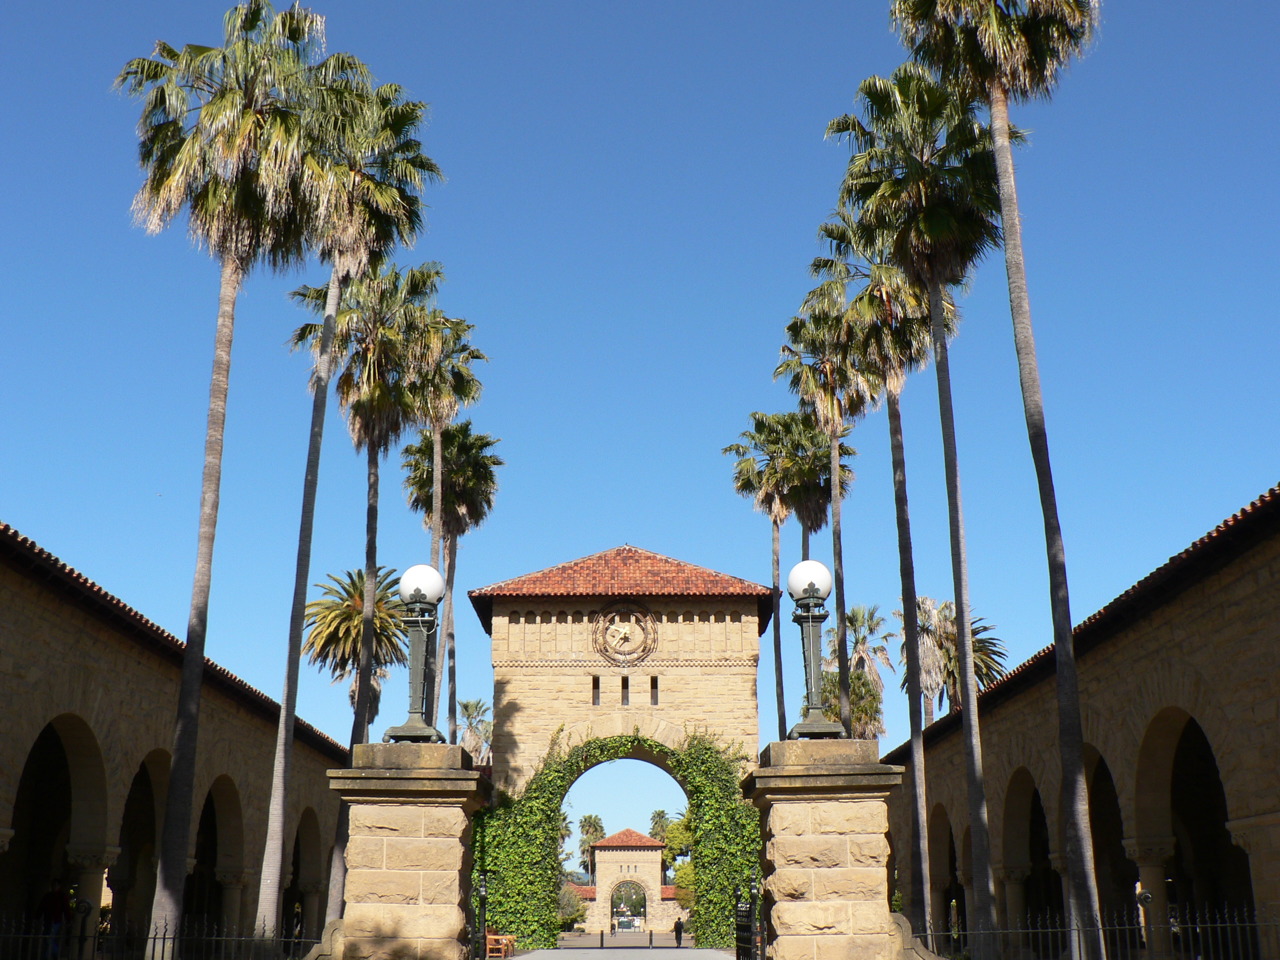 a gate and palm trees line an entrance to a courtyard